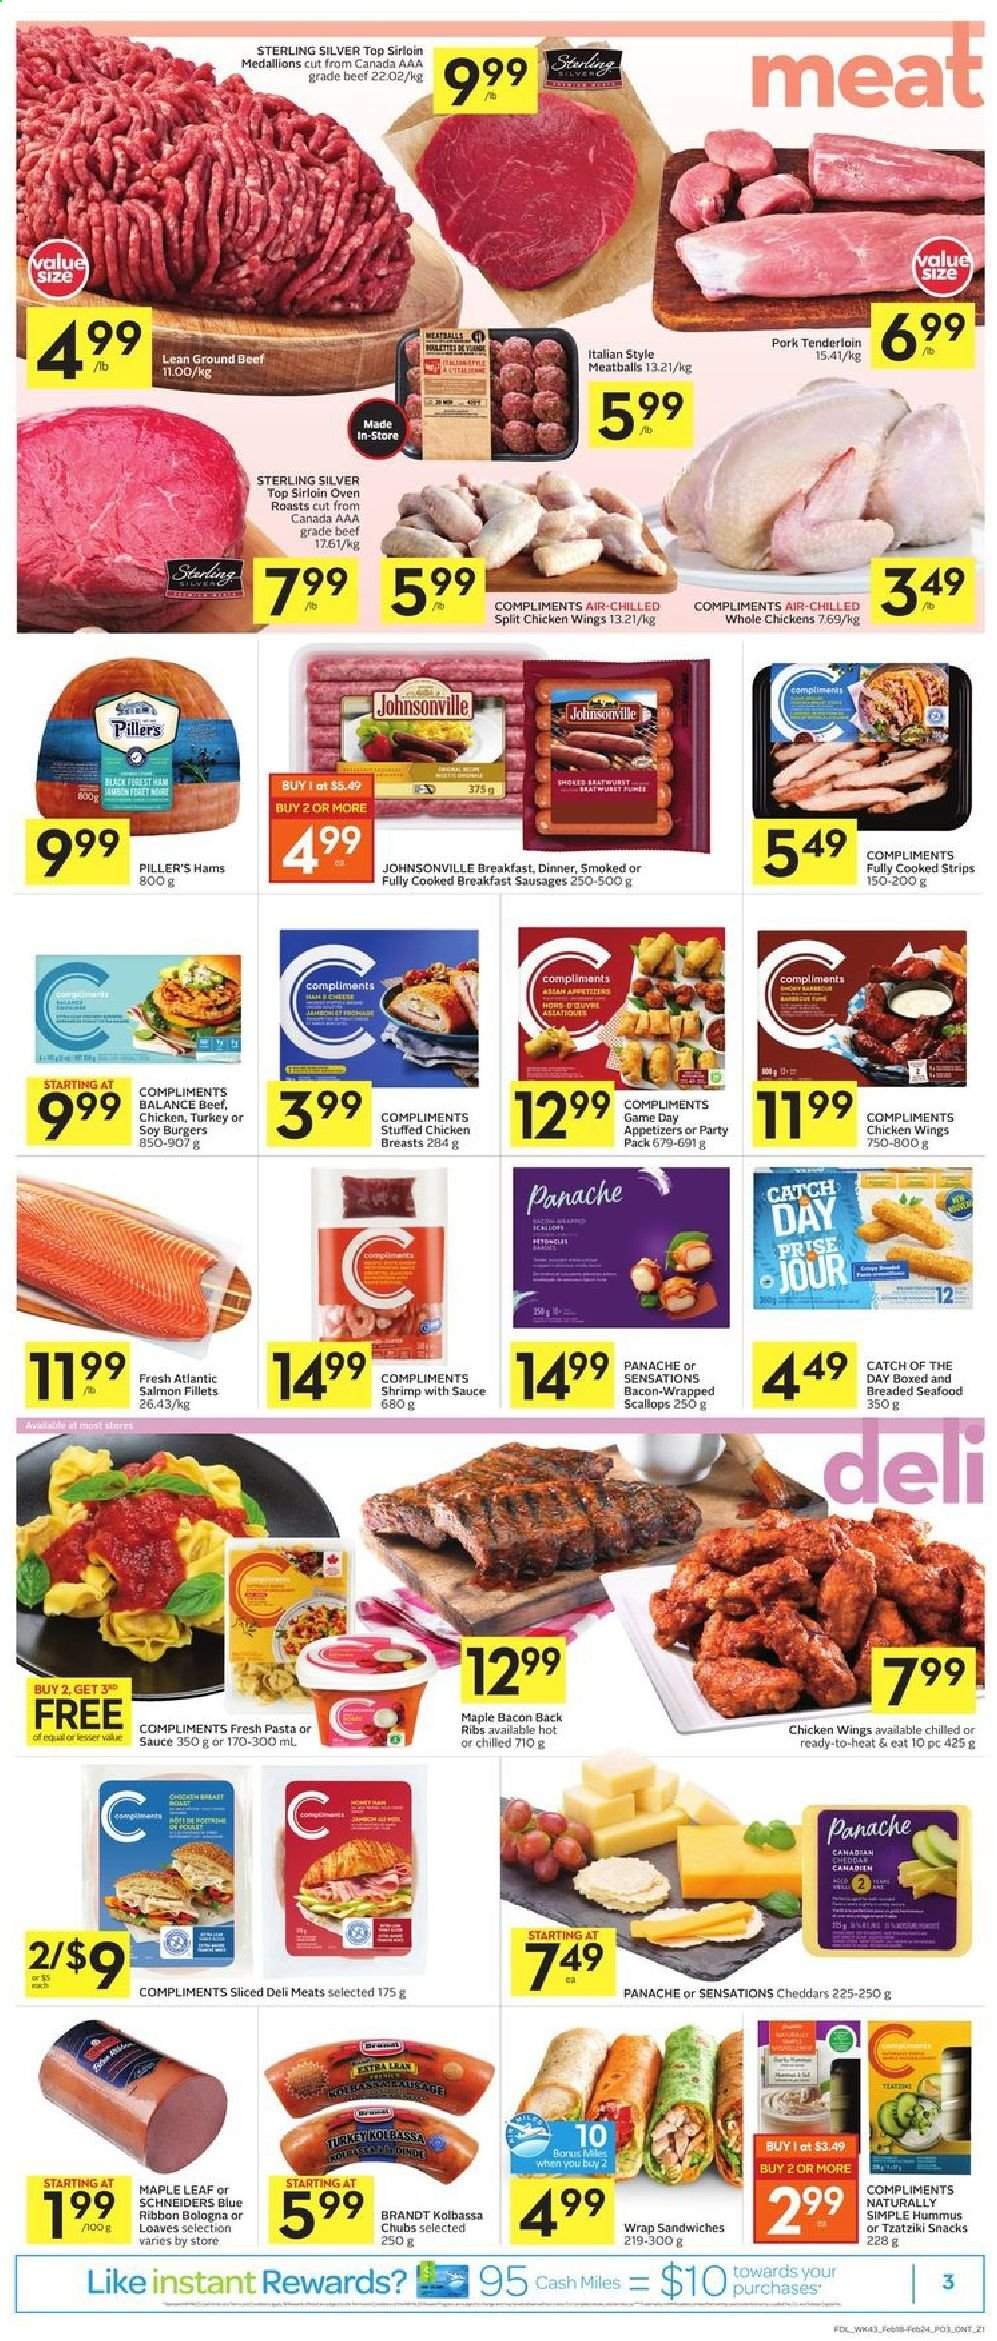 thumbnail - Foodland Flyer - February 18, 2021 - February 24, 2021 - Sales products - Blue Ribbon, bacon wrapped scallops, salmon, salmon fillet, scallops, seafood, shrimps, meatballs, hamburger, stuffed chicken, bacon, ham, bologna sausage, Johnsonville, sausage, tzatziki, hummus, chicken wings, strips, snack, whole chicken, beef meat, ground beef, pork meat, pork tenderloin. Page 3.